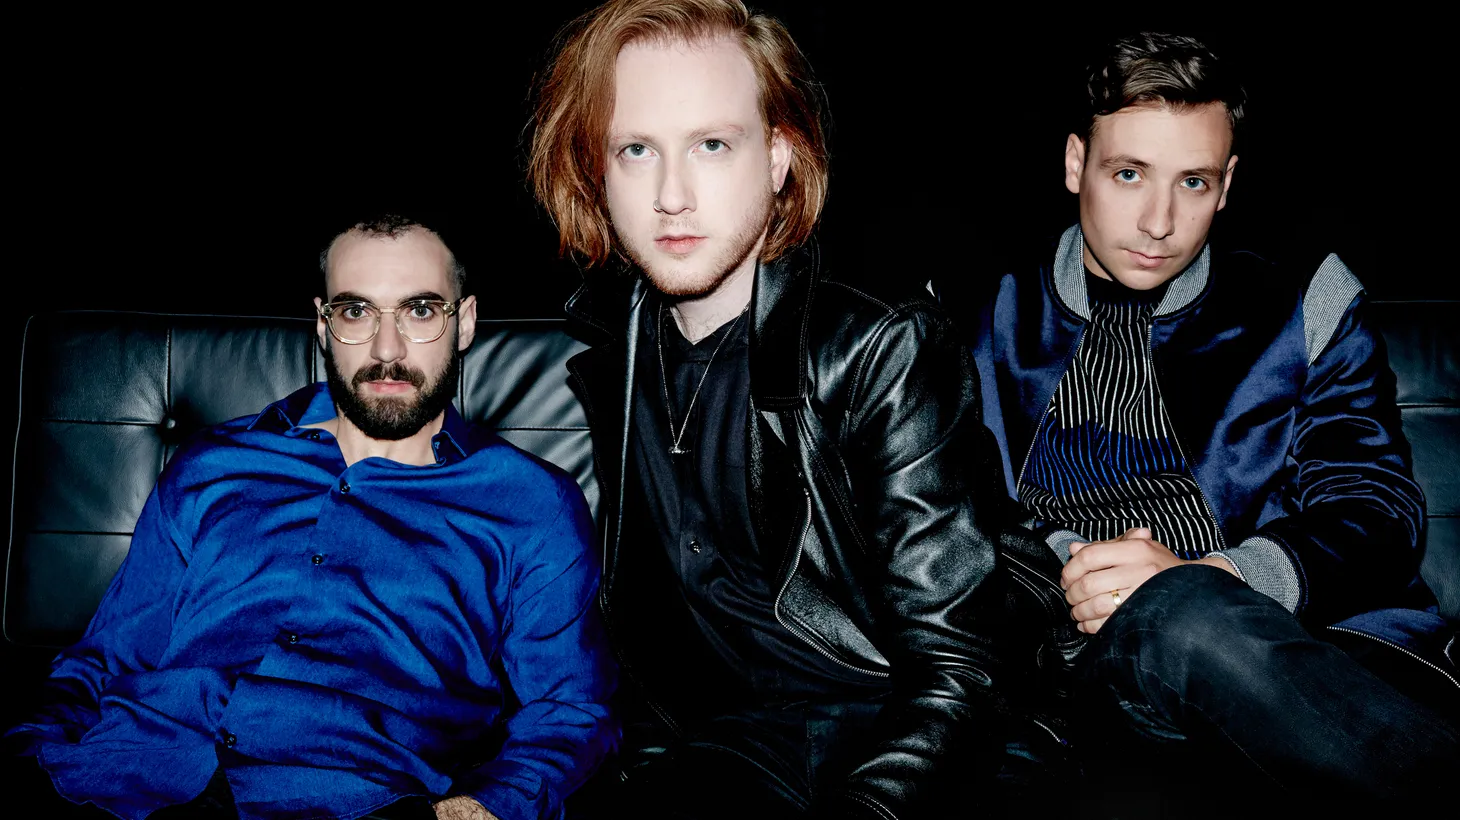 Two Door Cinema Club's new album was born after a three-year break during which the road-weary trio recuperated and their fans eagerly awaited new material.